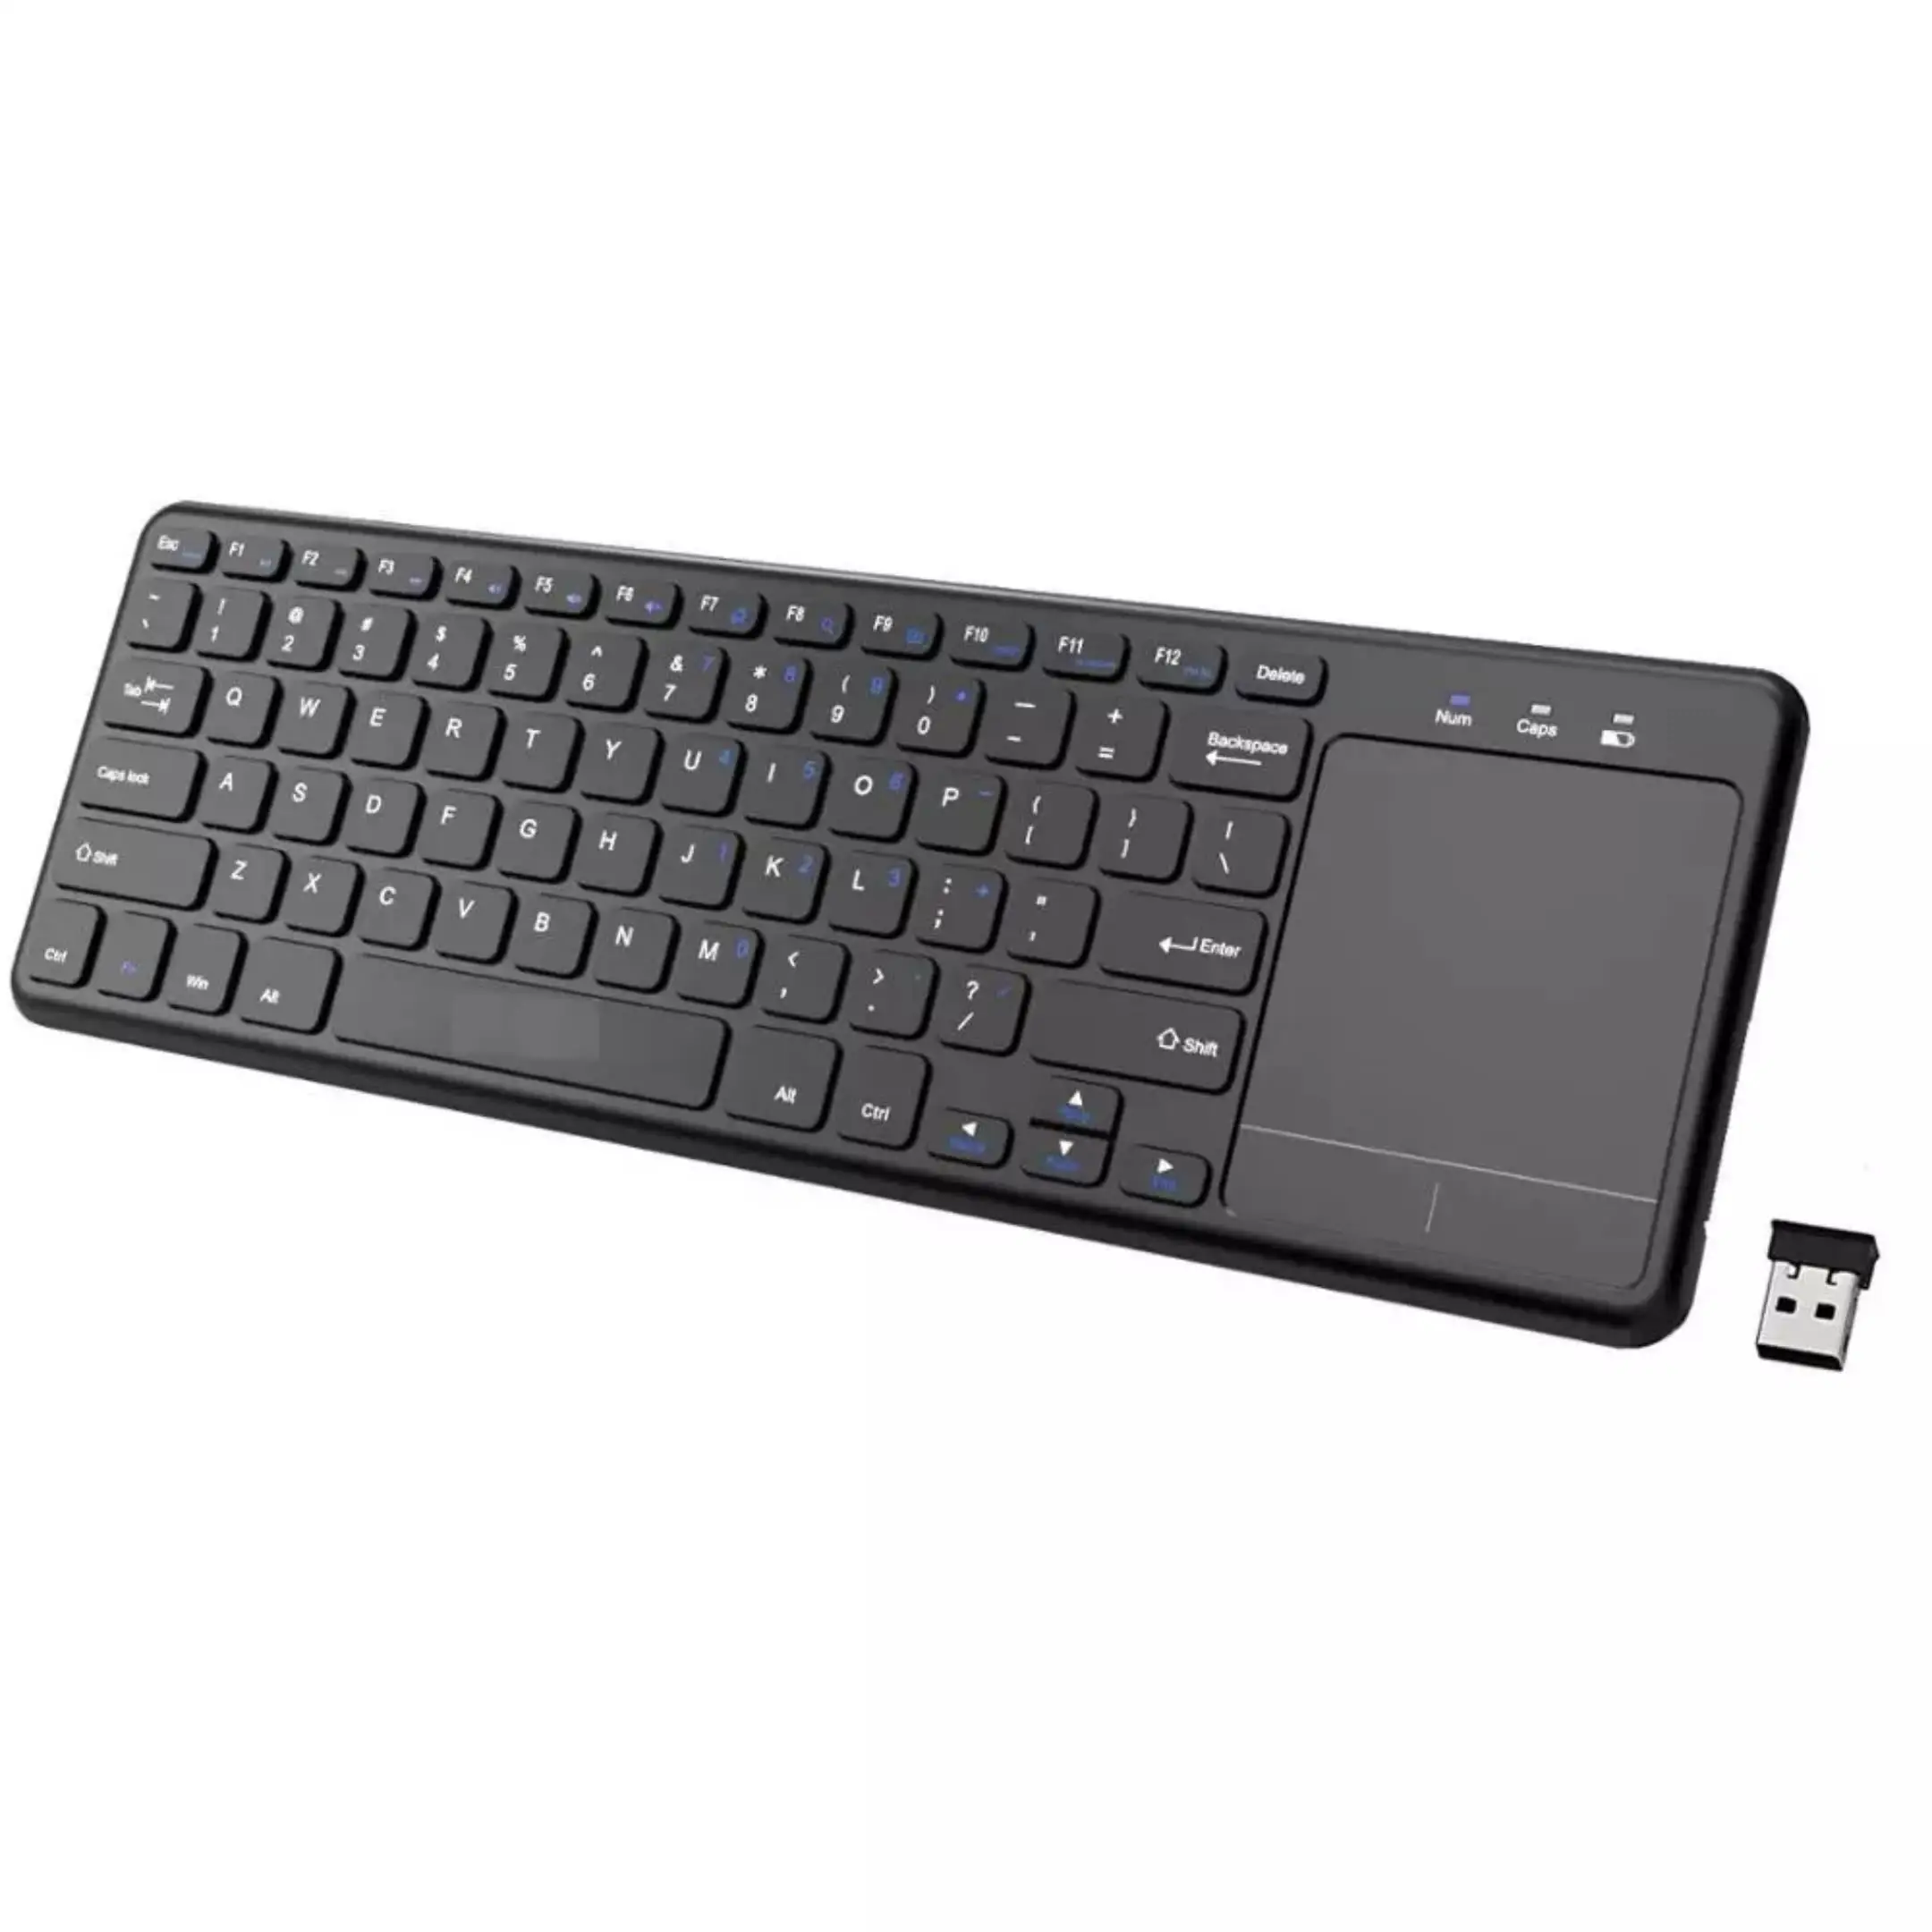 Wireless Keyboard with Touchpad 2.4GHz Notebook keyboard wireless Track Pad for Notebook Tablets Laptop coumpter keyboard